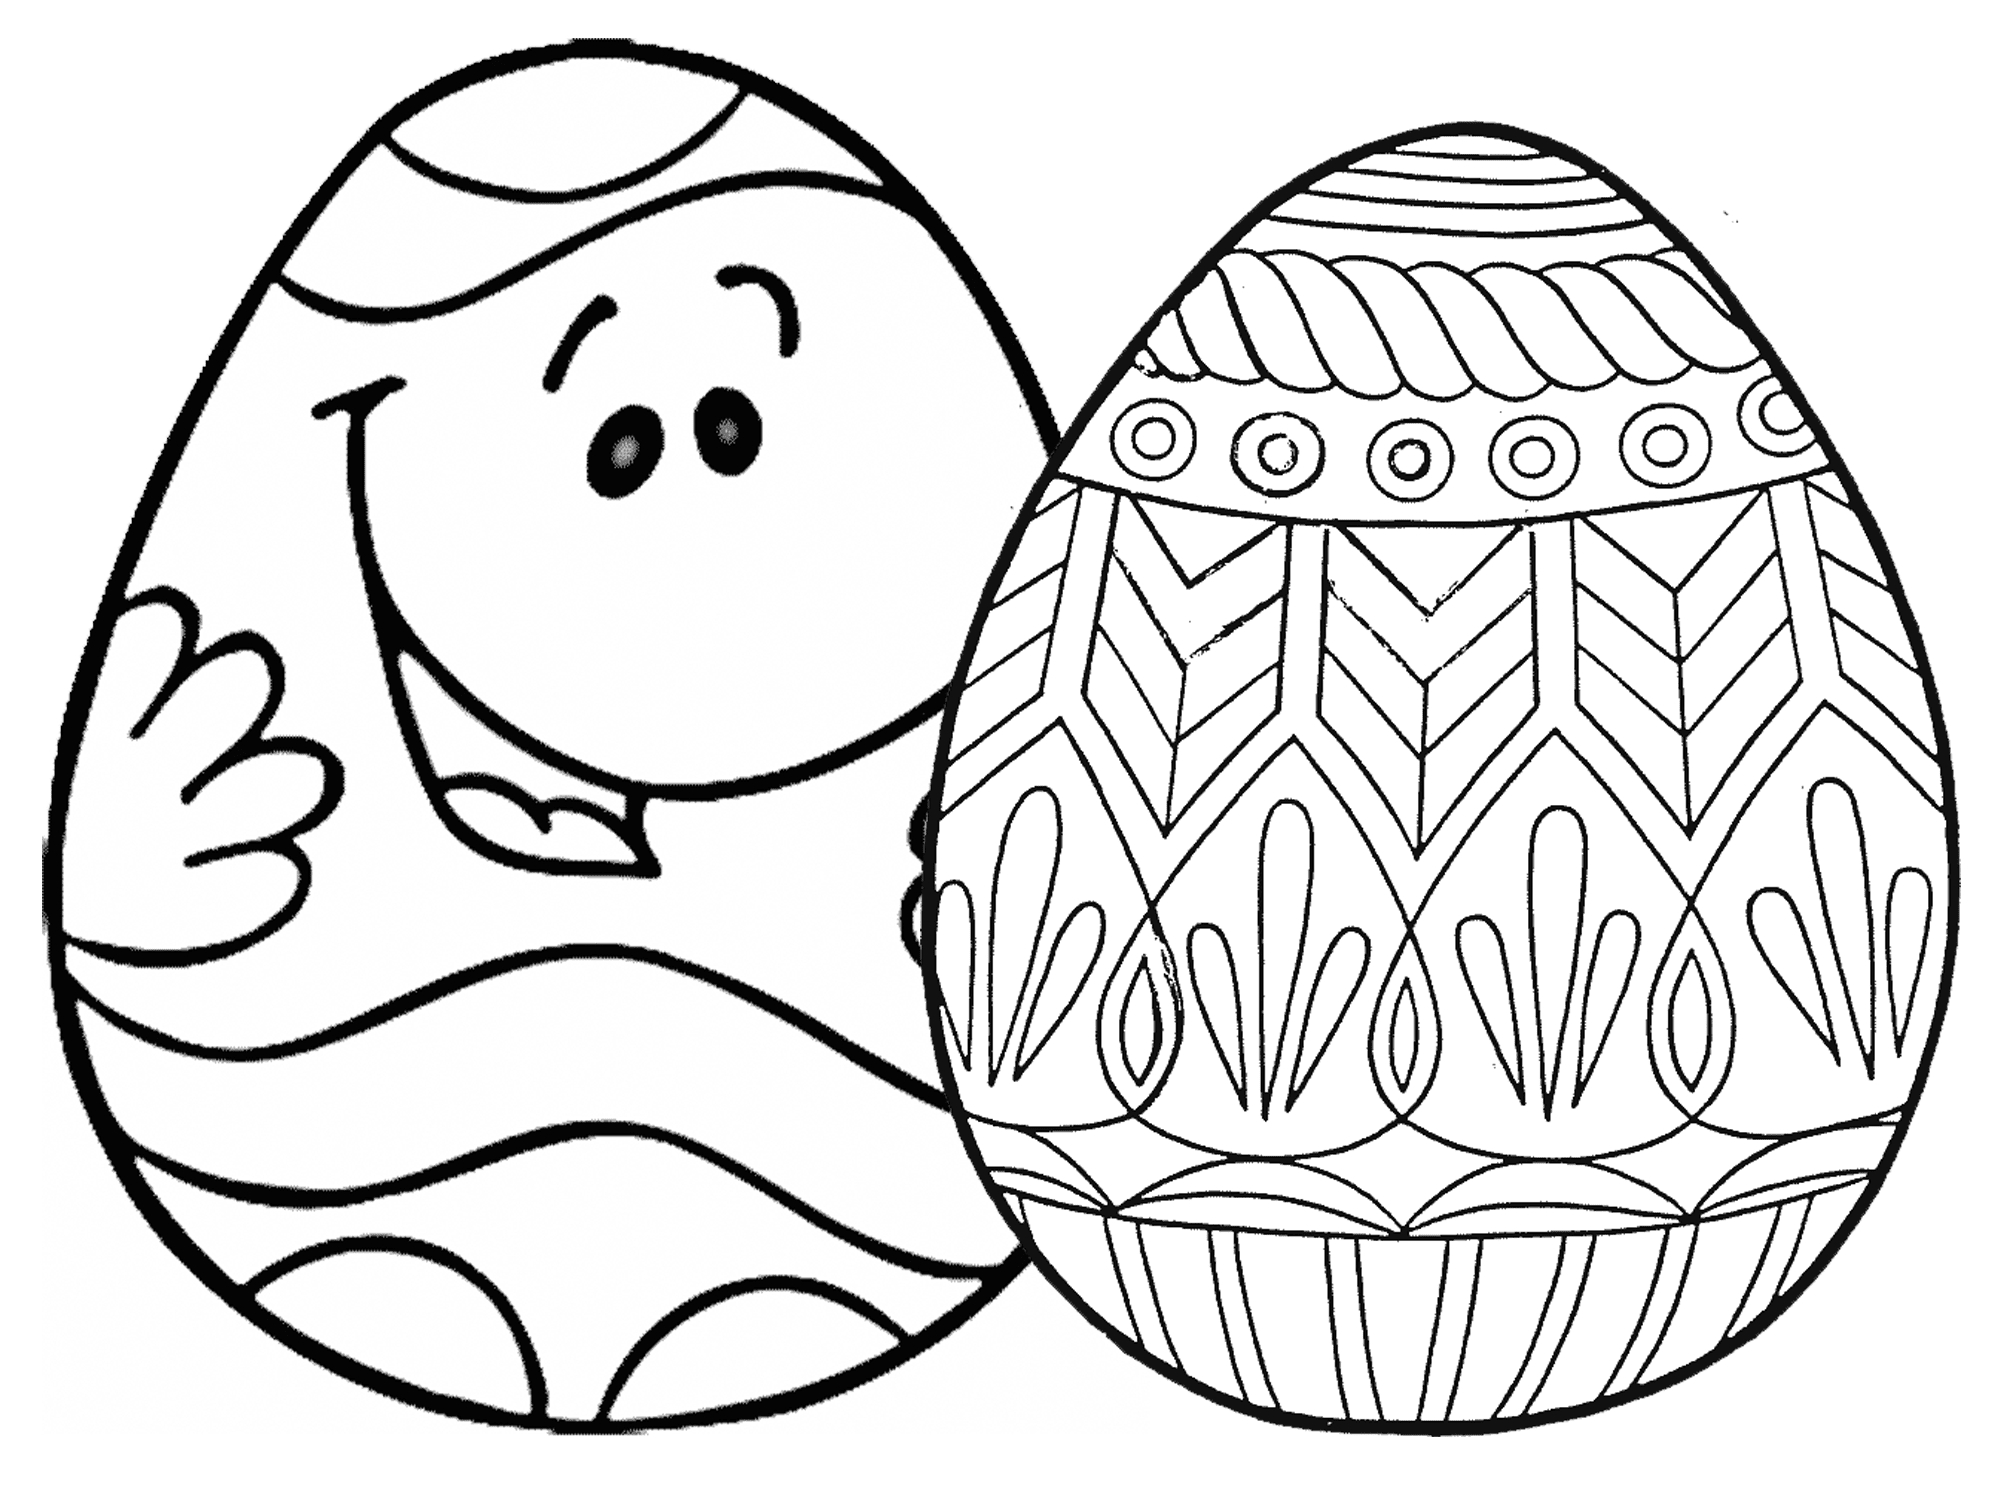 7 Places For Free, Printable Easter Egg Coloring Pages - Free Printable Easter Drawings